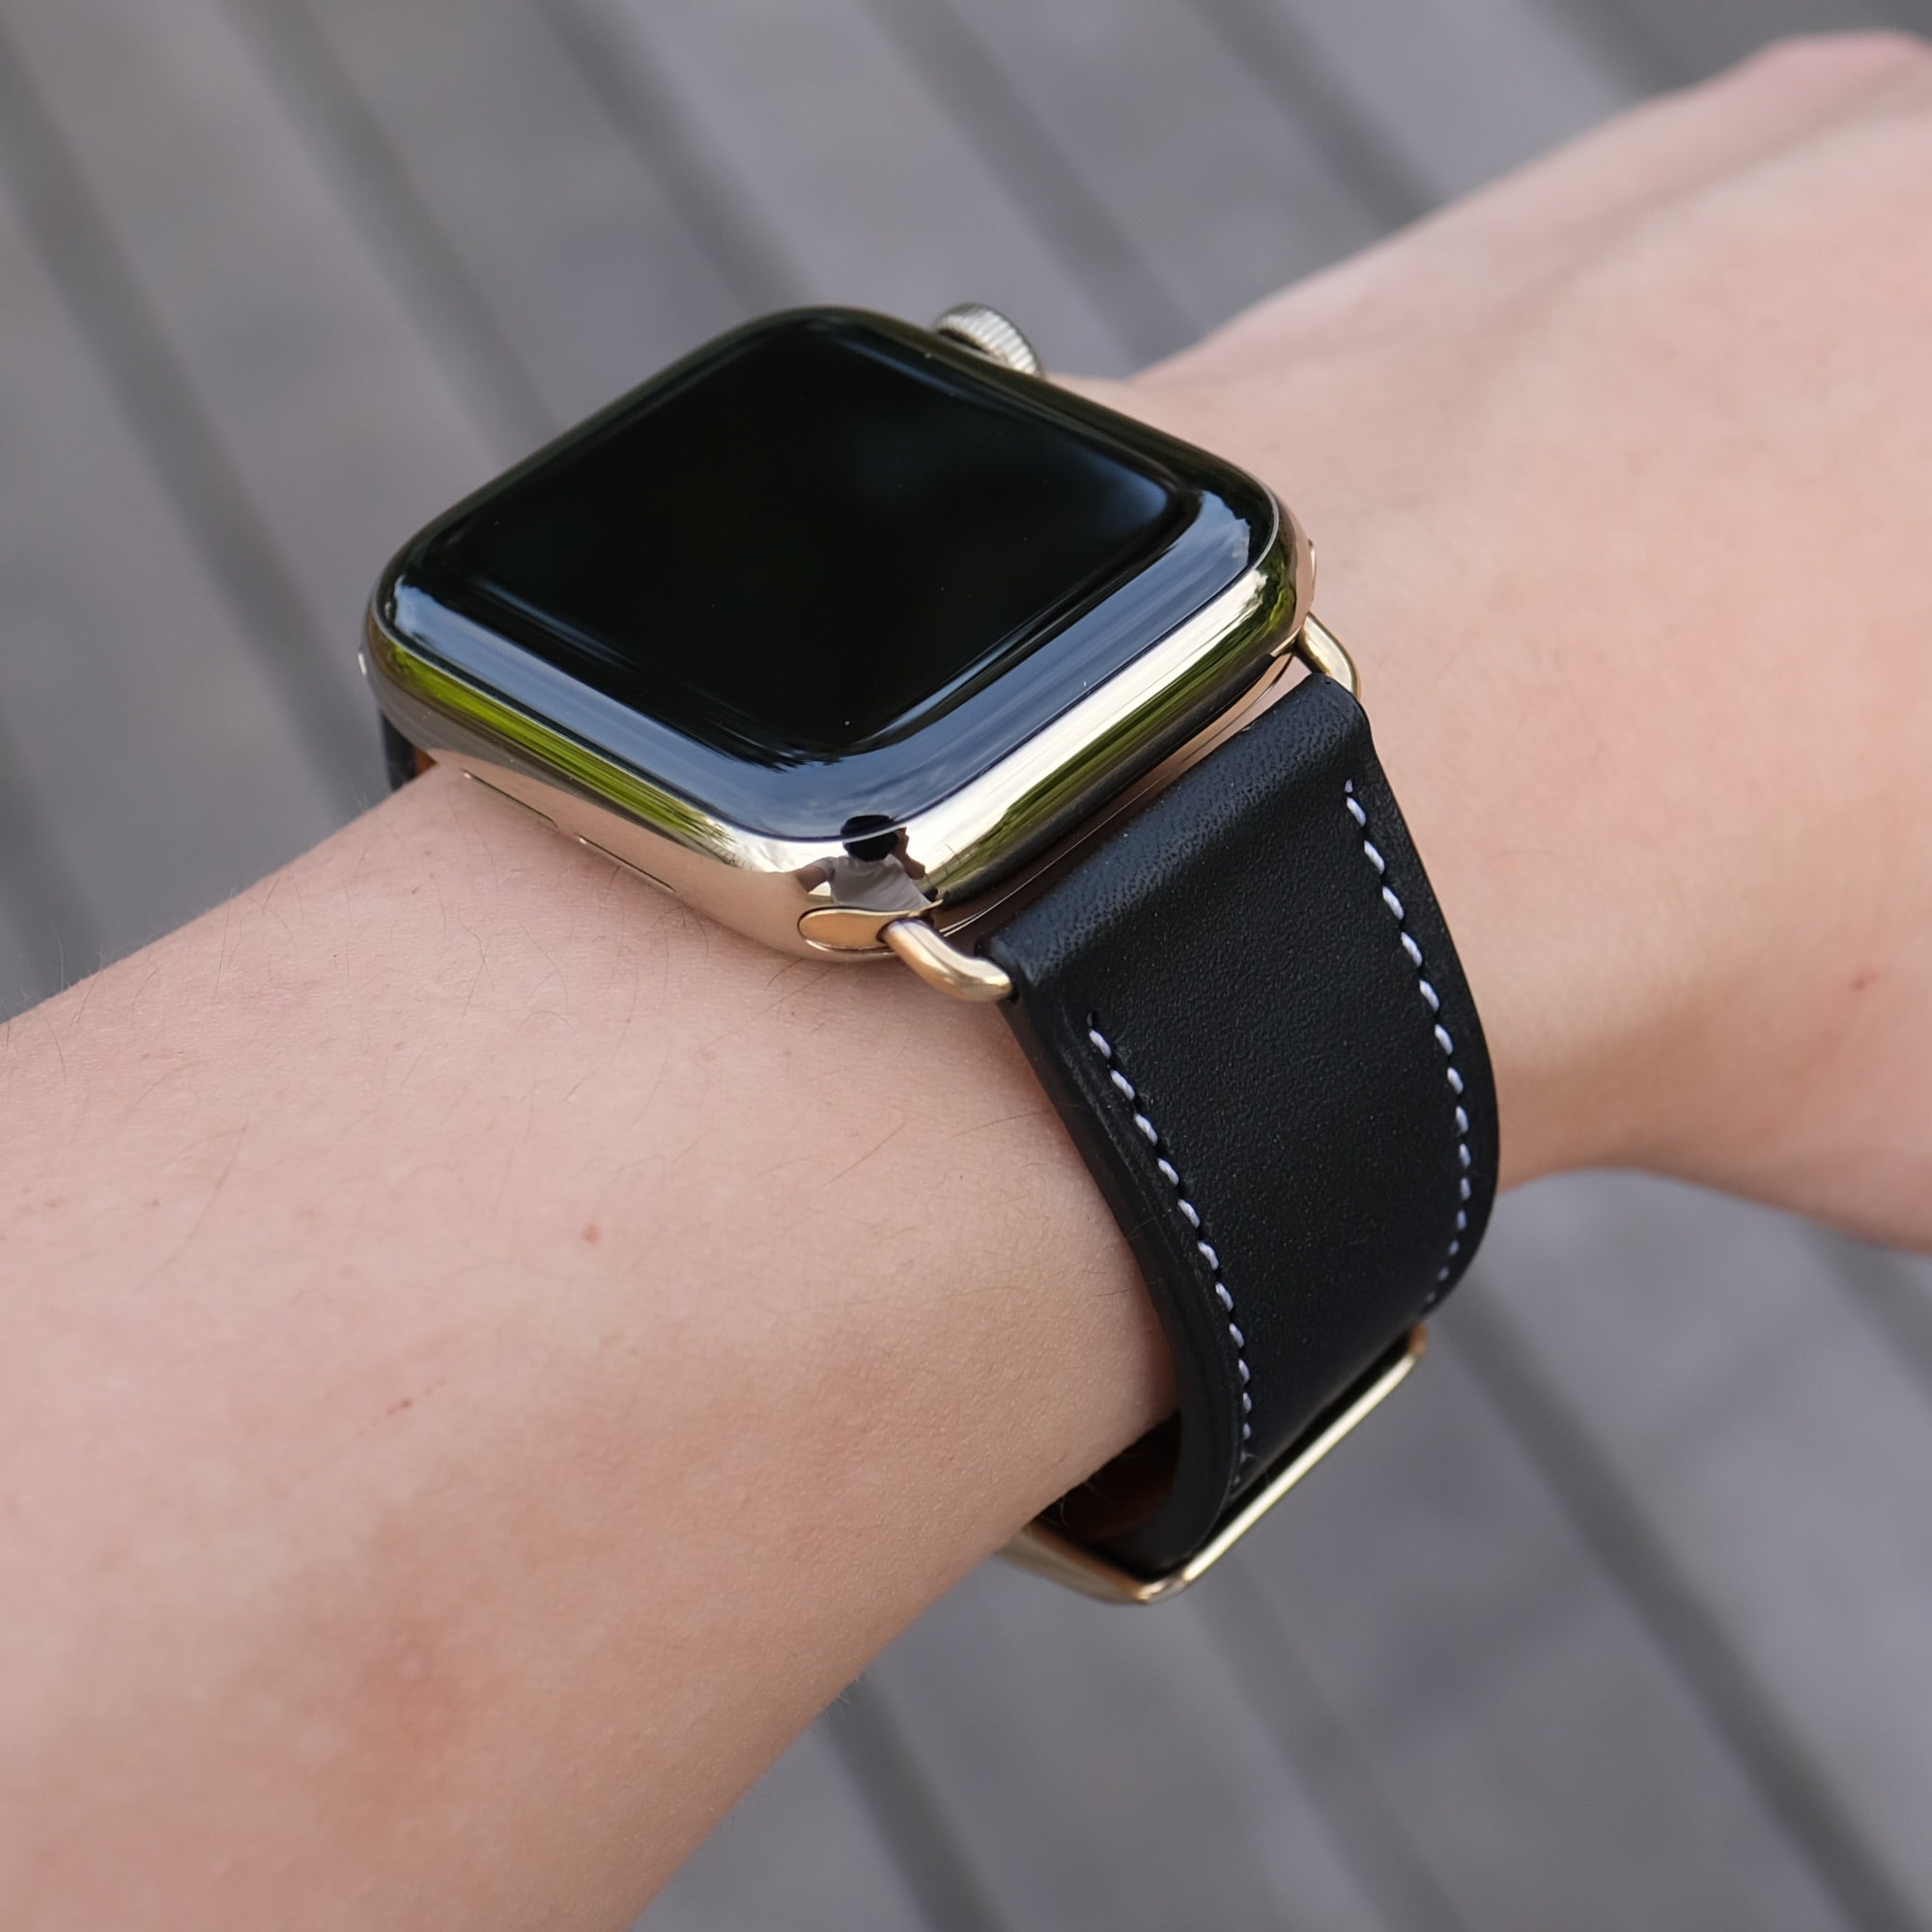 Barenia Leather Apple Watch Bands by Pin & Buckle - Black - Silver Stainless Steel Hardware - on Wrist